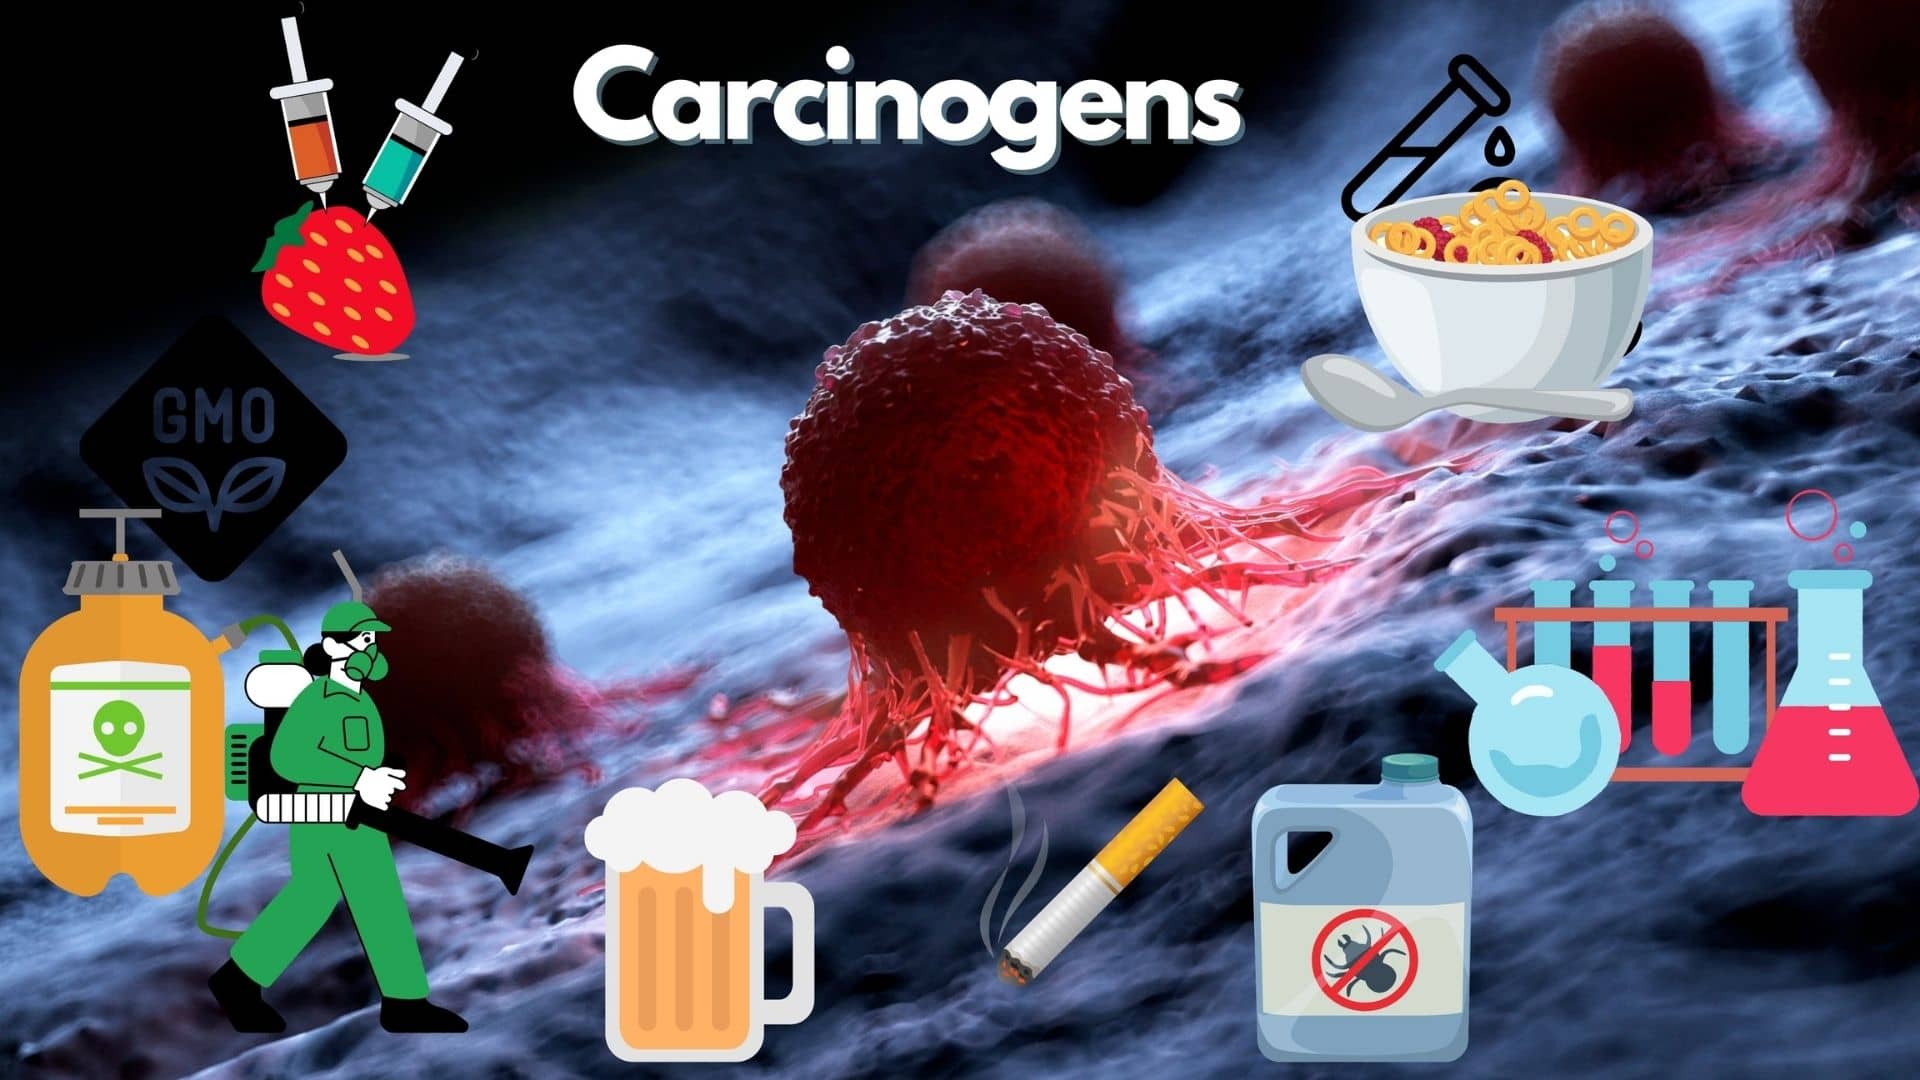 Common carcinogens that you should avoid if you don't want to get cancer.